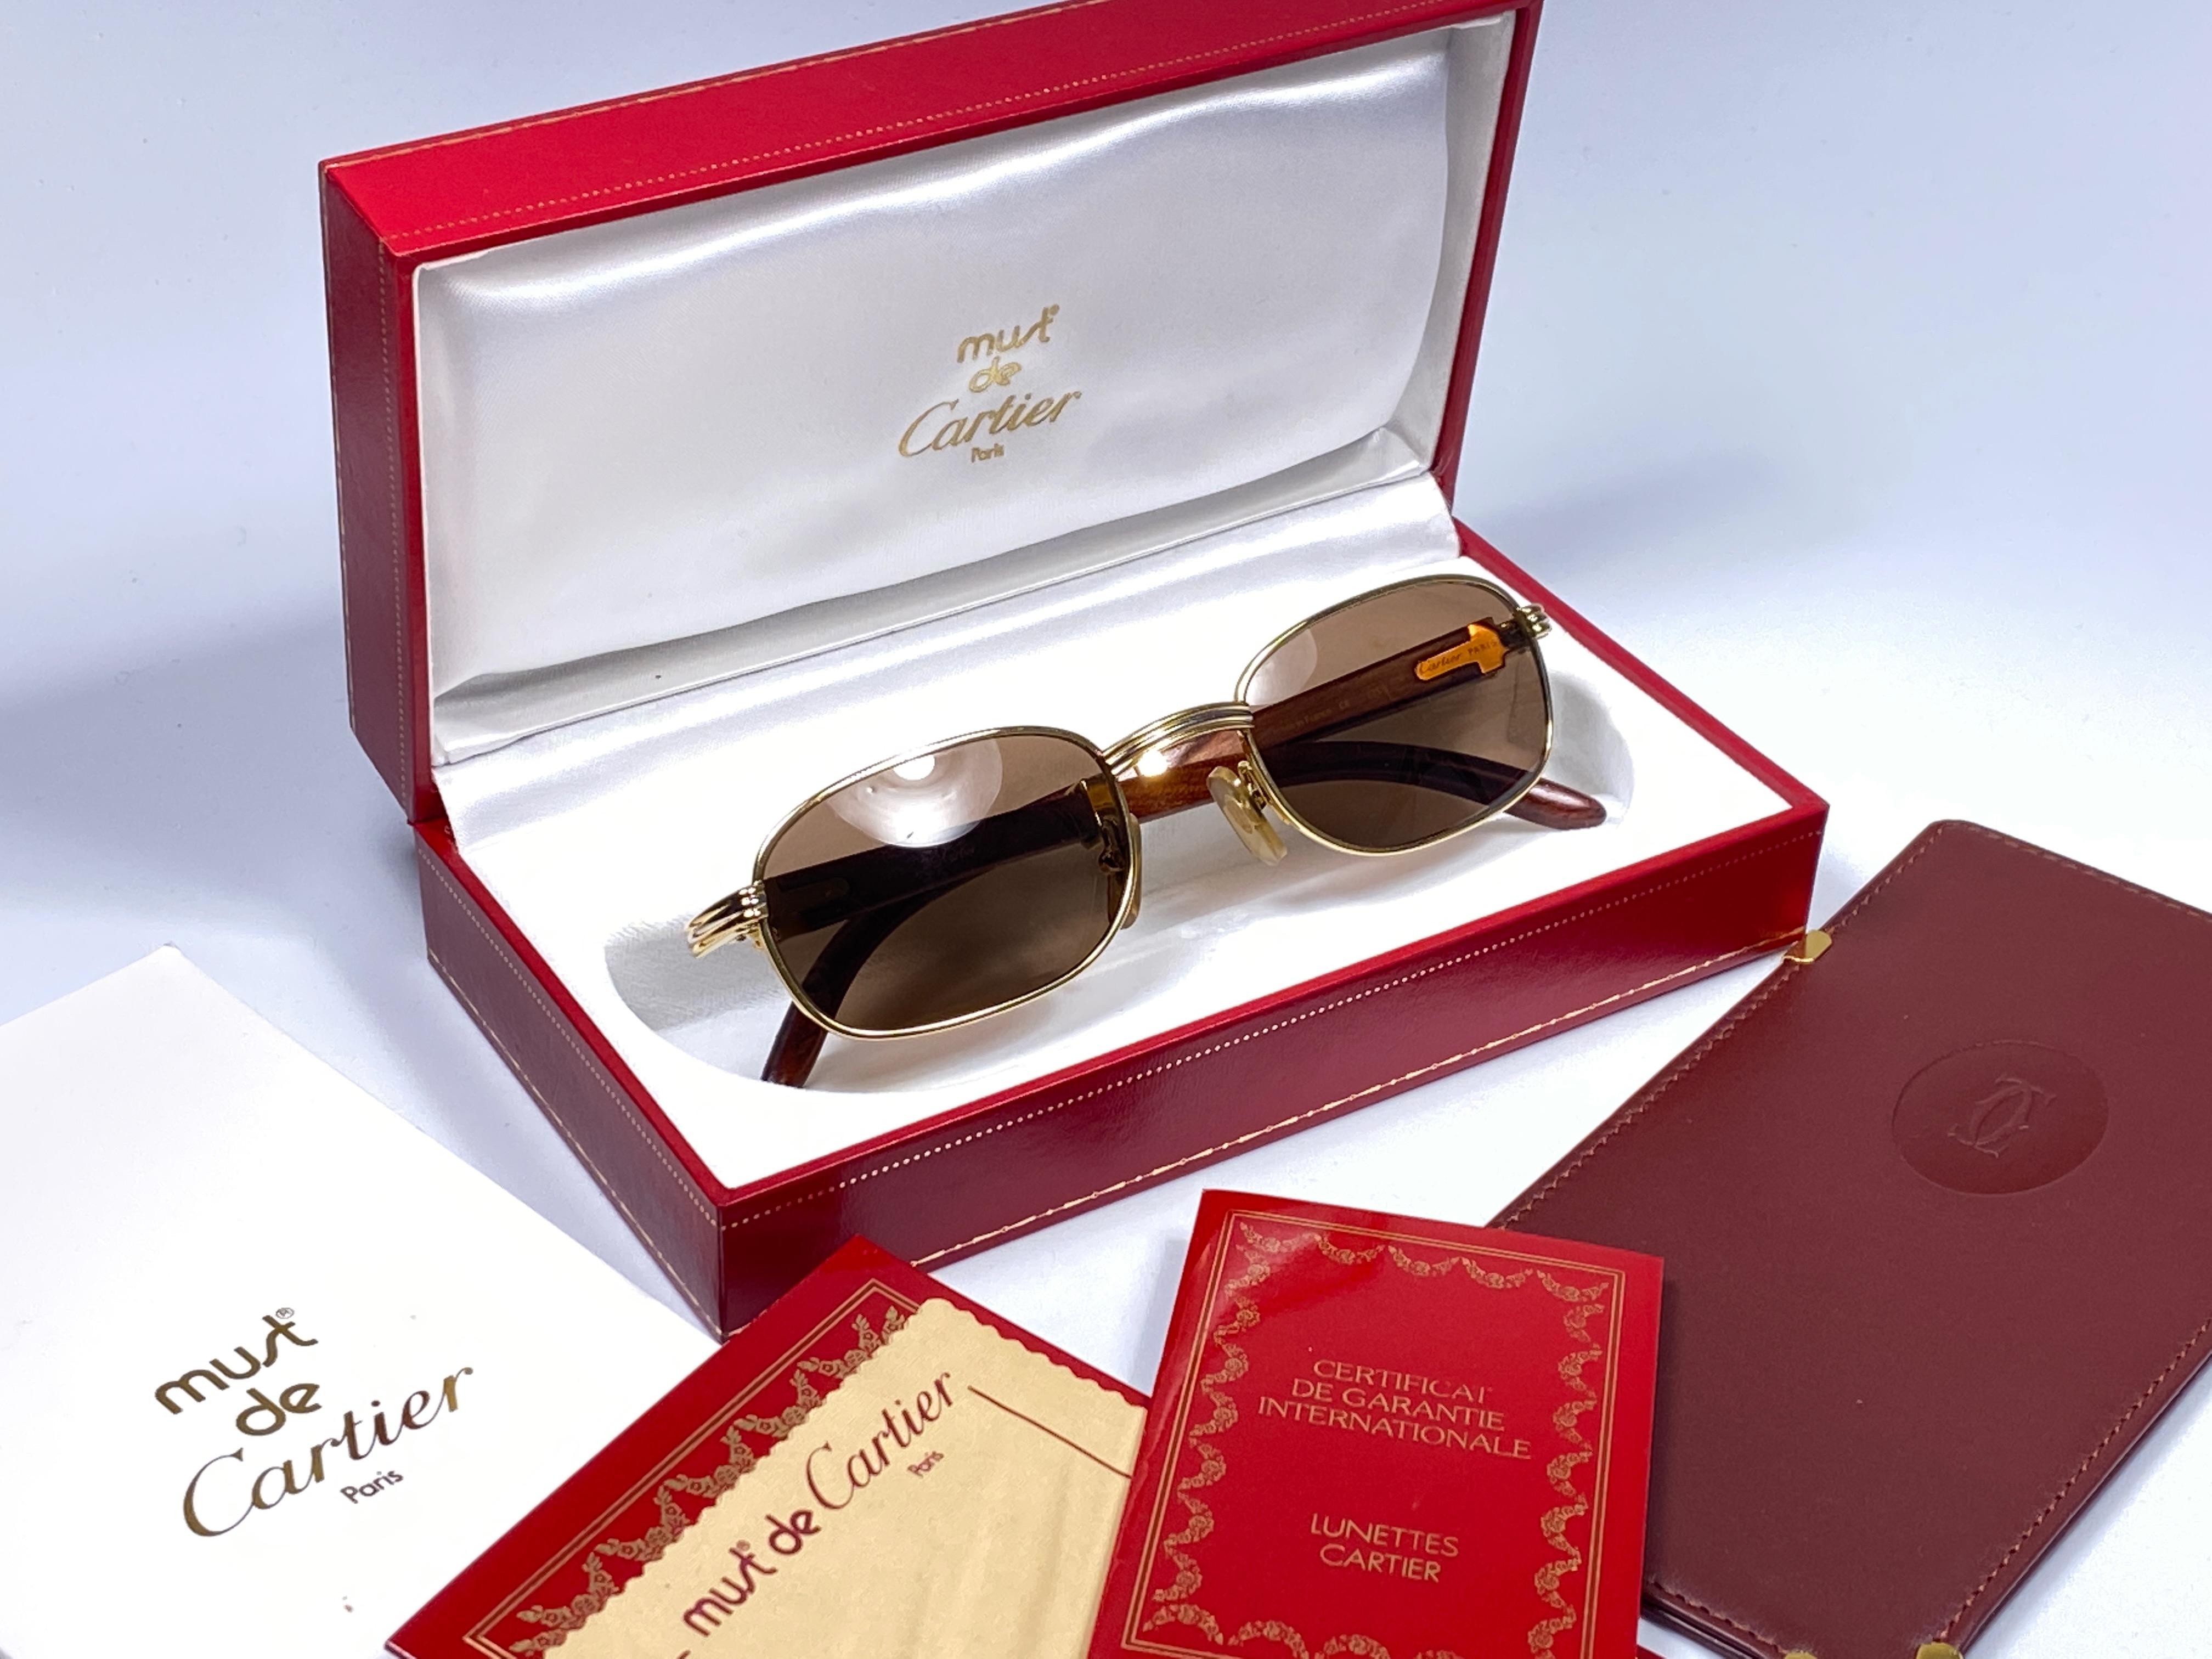 New 1990 Cartier Full Set Breteuil Bubinga Hardwood Sunglasses with new solid honey brown (uv protection) lenses. 
Frame is with the front and sides in yellow and white gold and has the famous wood & gold accents temples. 
Amazing craftsmanship! All